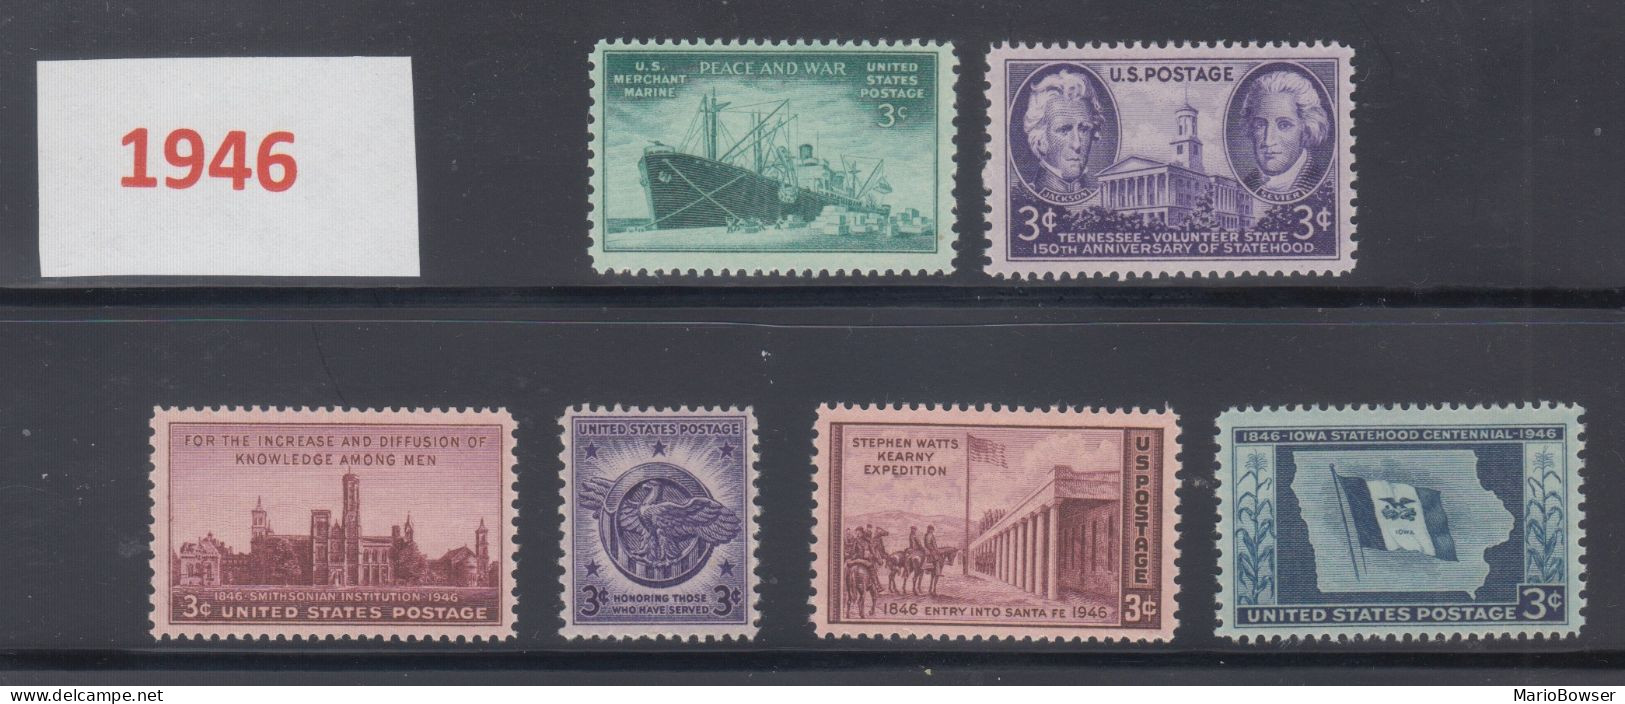 USA 1946 Full Year Commemorative MNH Stamps Set SC# 939-944 With 5 Stamps - Full Years